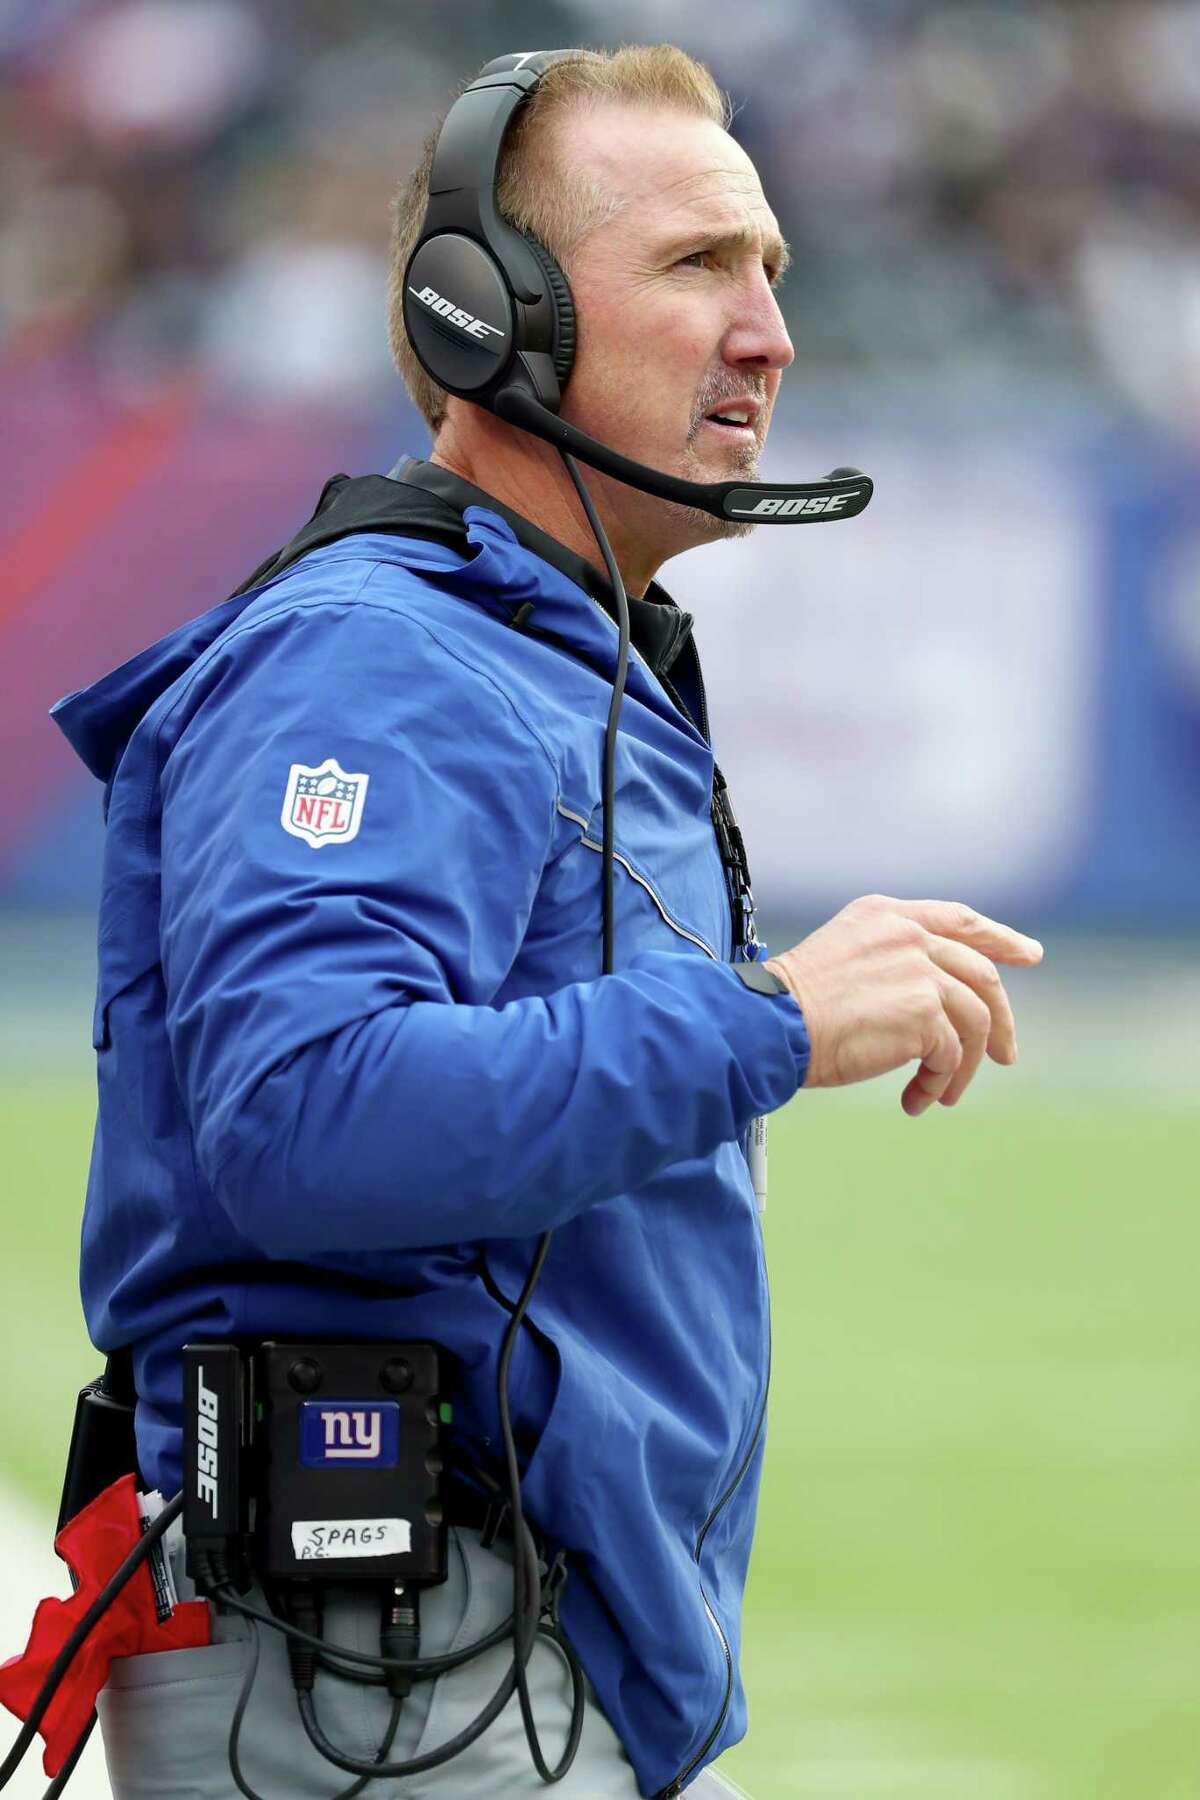 EAST RUTHERFORD, NJ - DECEMBER 17: Interim head coach Steve Spagnuolo of the New York Giants looks on against the Philadelphia Eagles during the first half in the game at MetLife Stadium on December 17, 2017 in East Rutherford, New Jersey. (Photo by Al Bello/Getty Images) ORG XMIT: 700070814